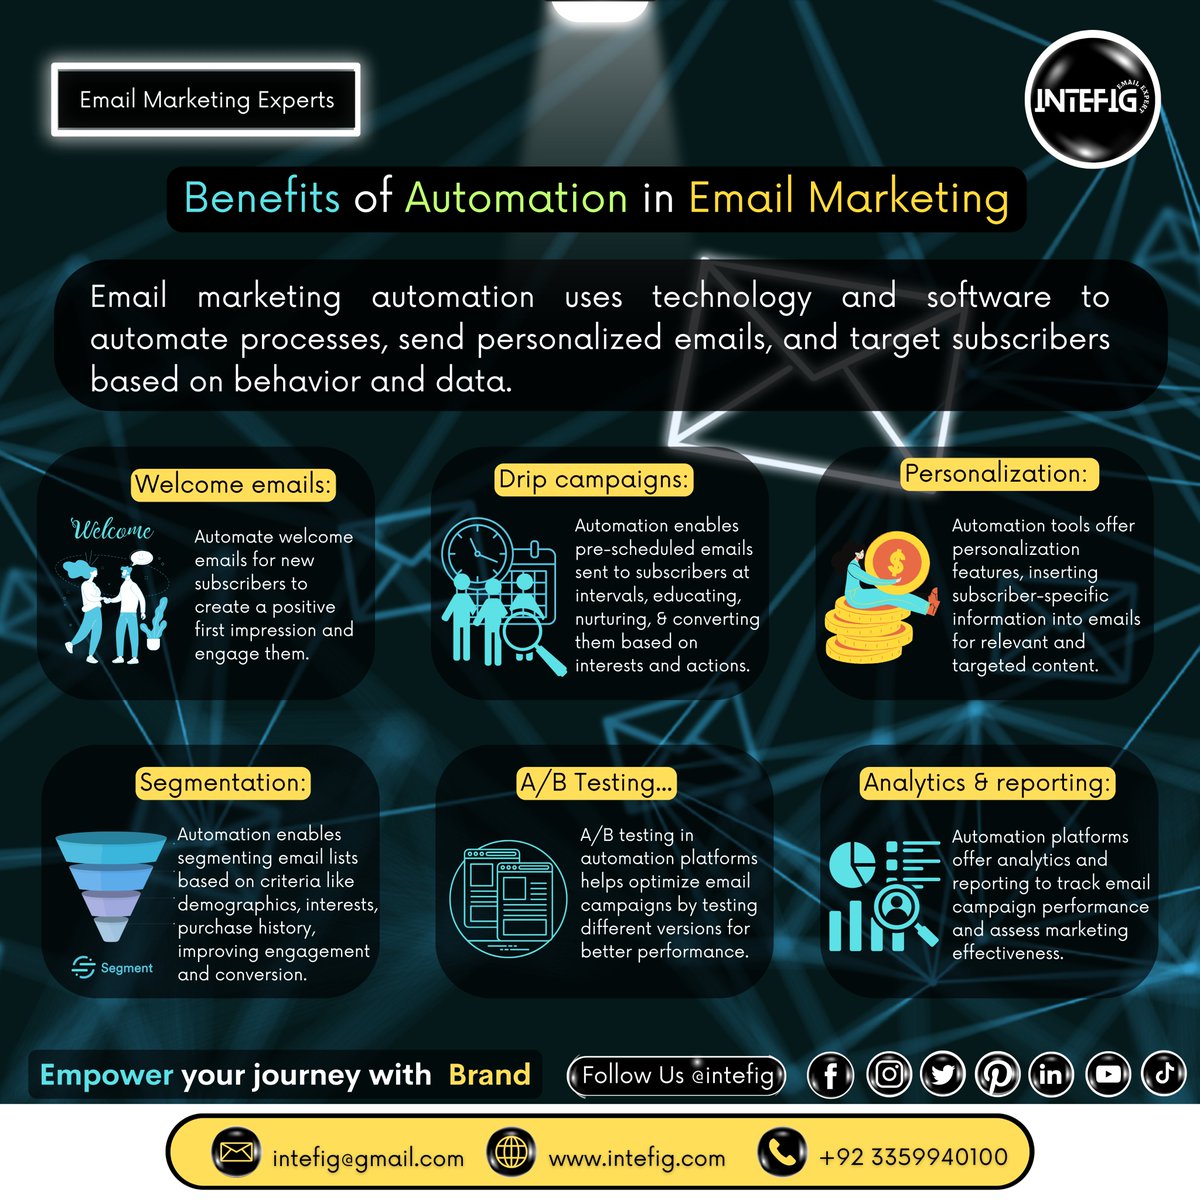 Benefits of #Automation in #emailmarketing

Connect with @Intefig_ for #Expert Guidance in #Growing your #business or #eCommerceStore.
#BlackFriday #CyberMonday #Emailautomation #EmailMarketer #mailchimp #klaviyo #omnisend #getresponse #mailerlite #Emailtemplates #ecommerce #MIP